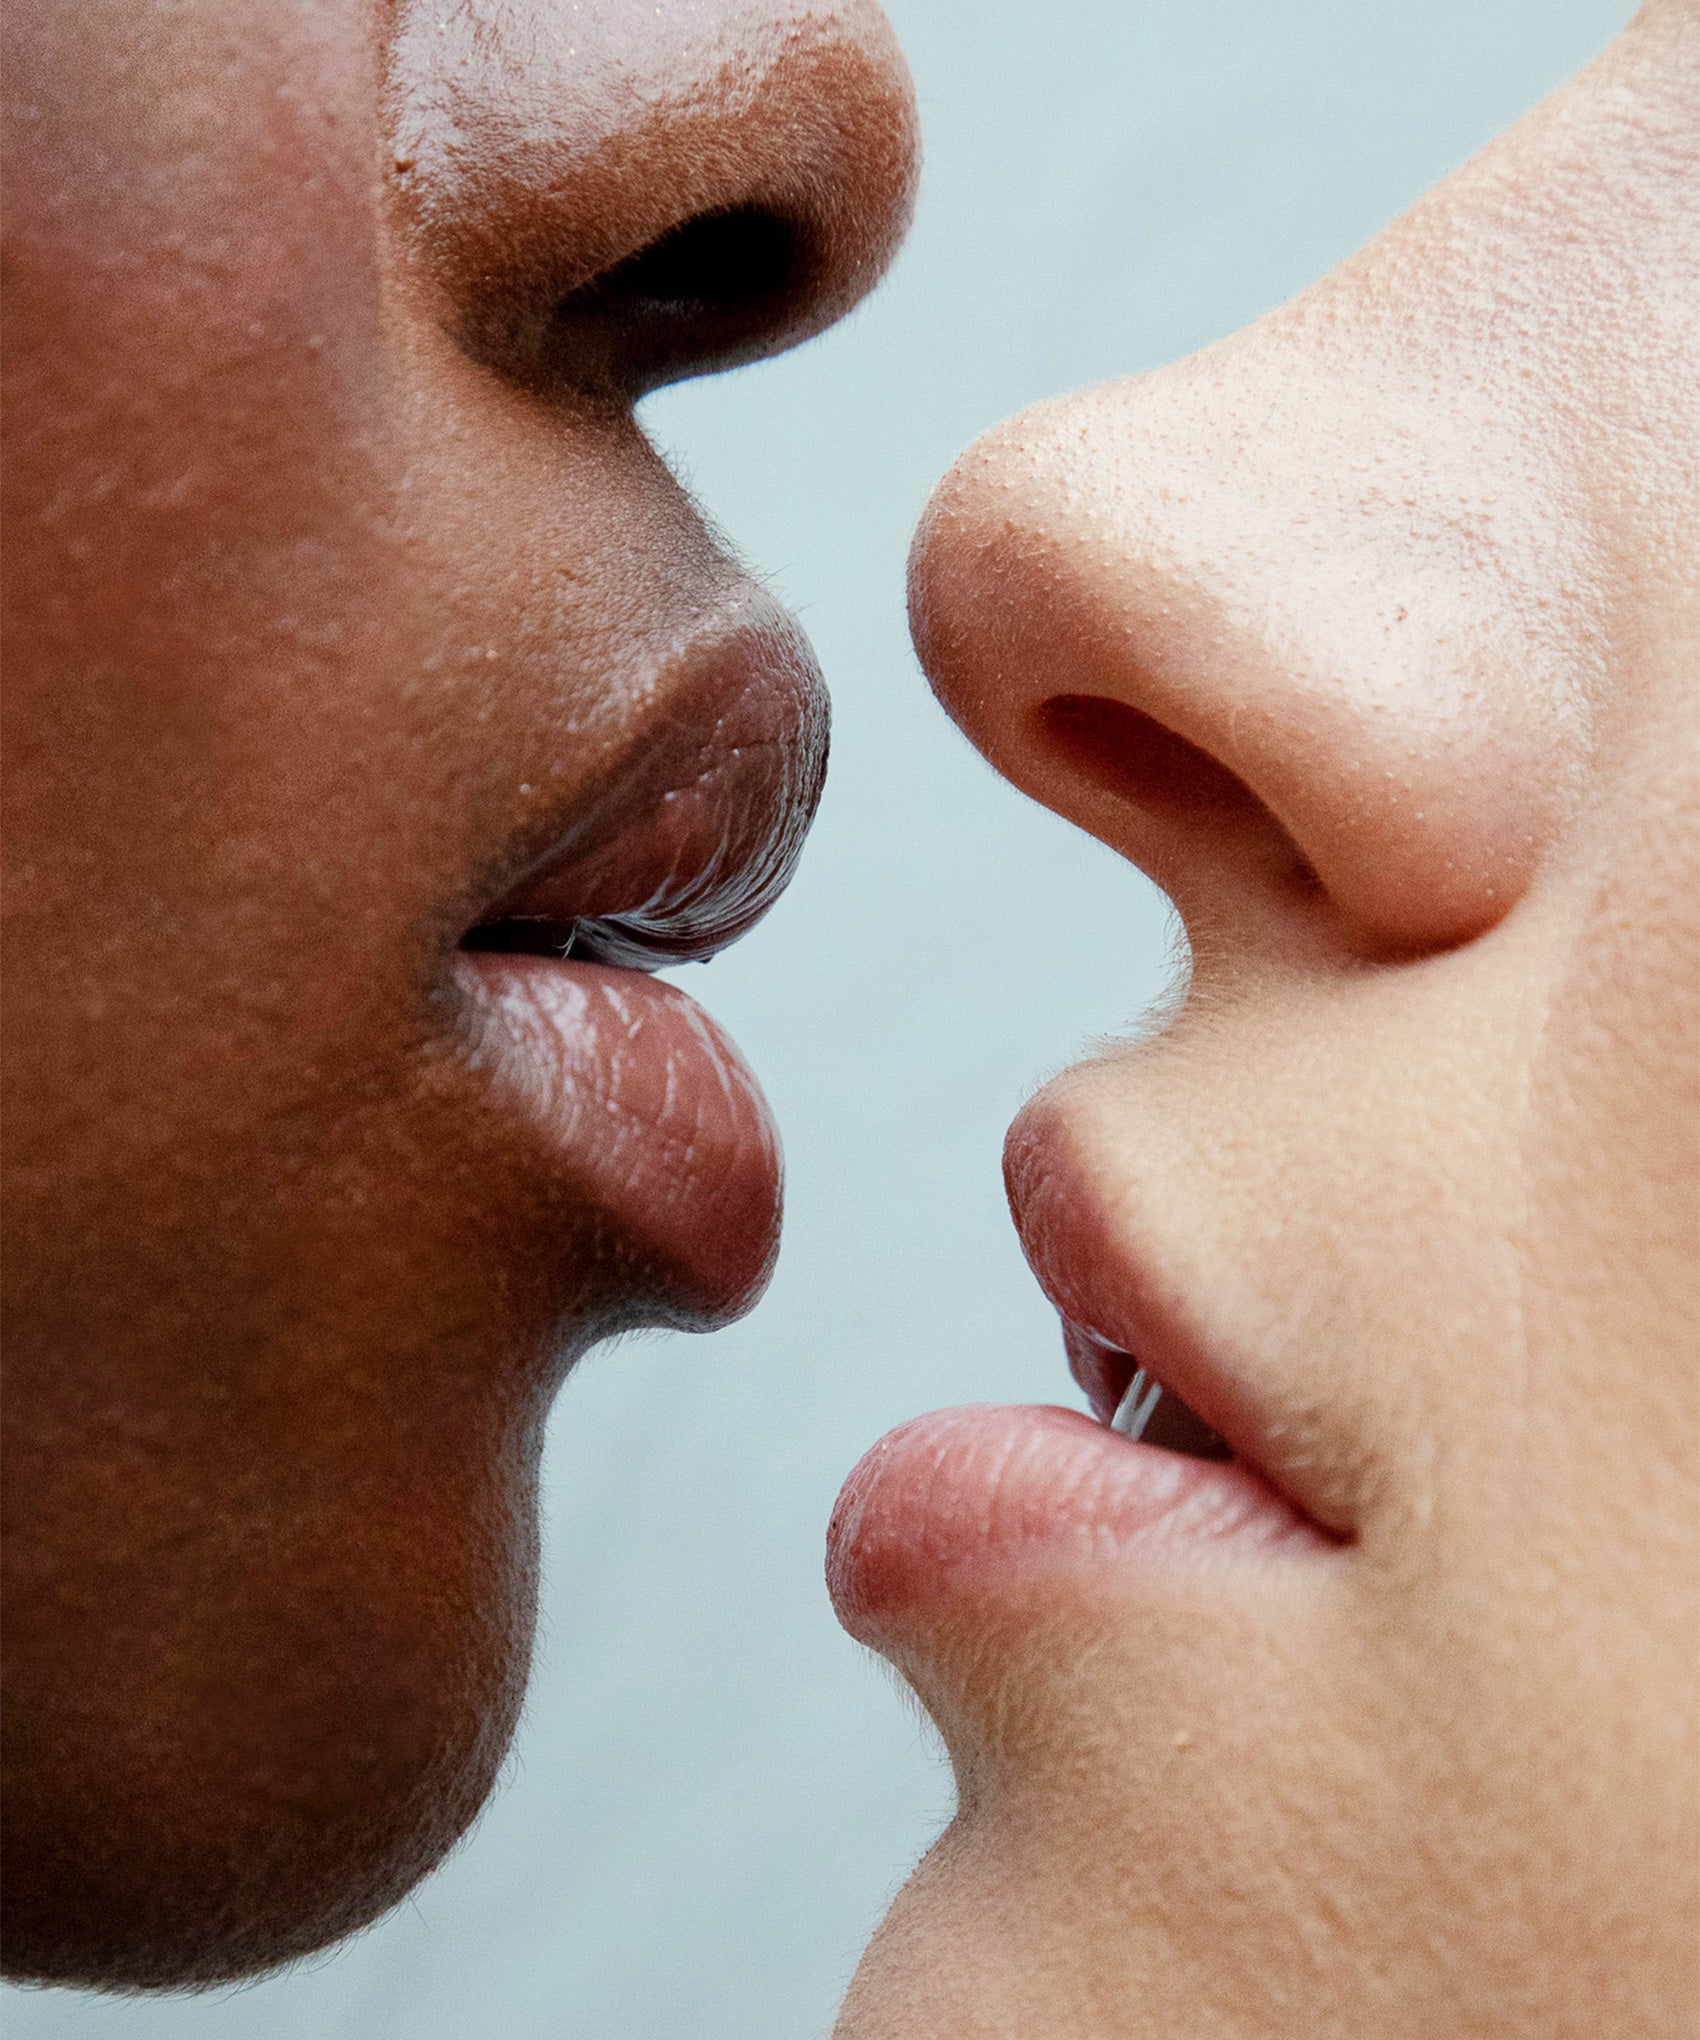 First Date Kiss: Pros and Cons